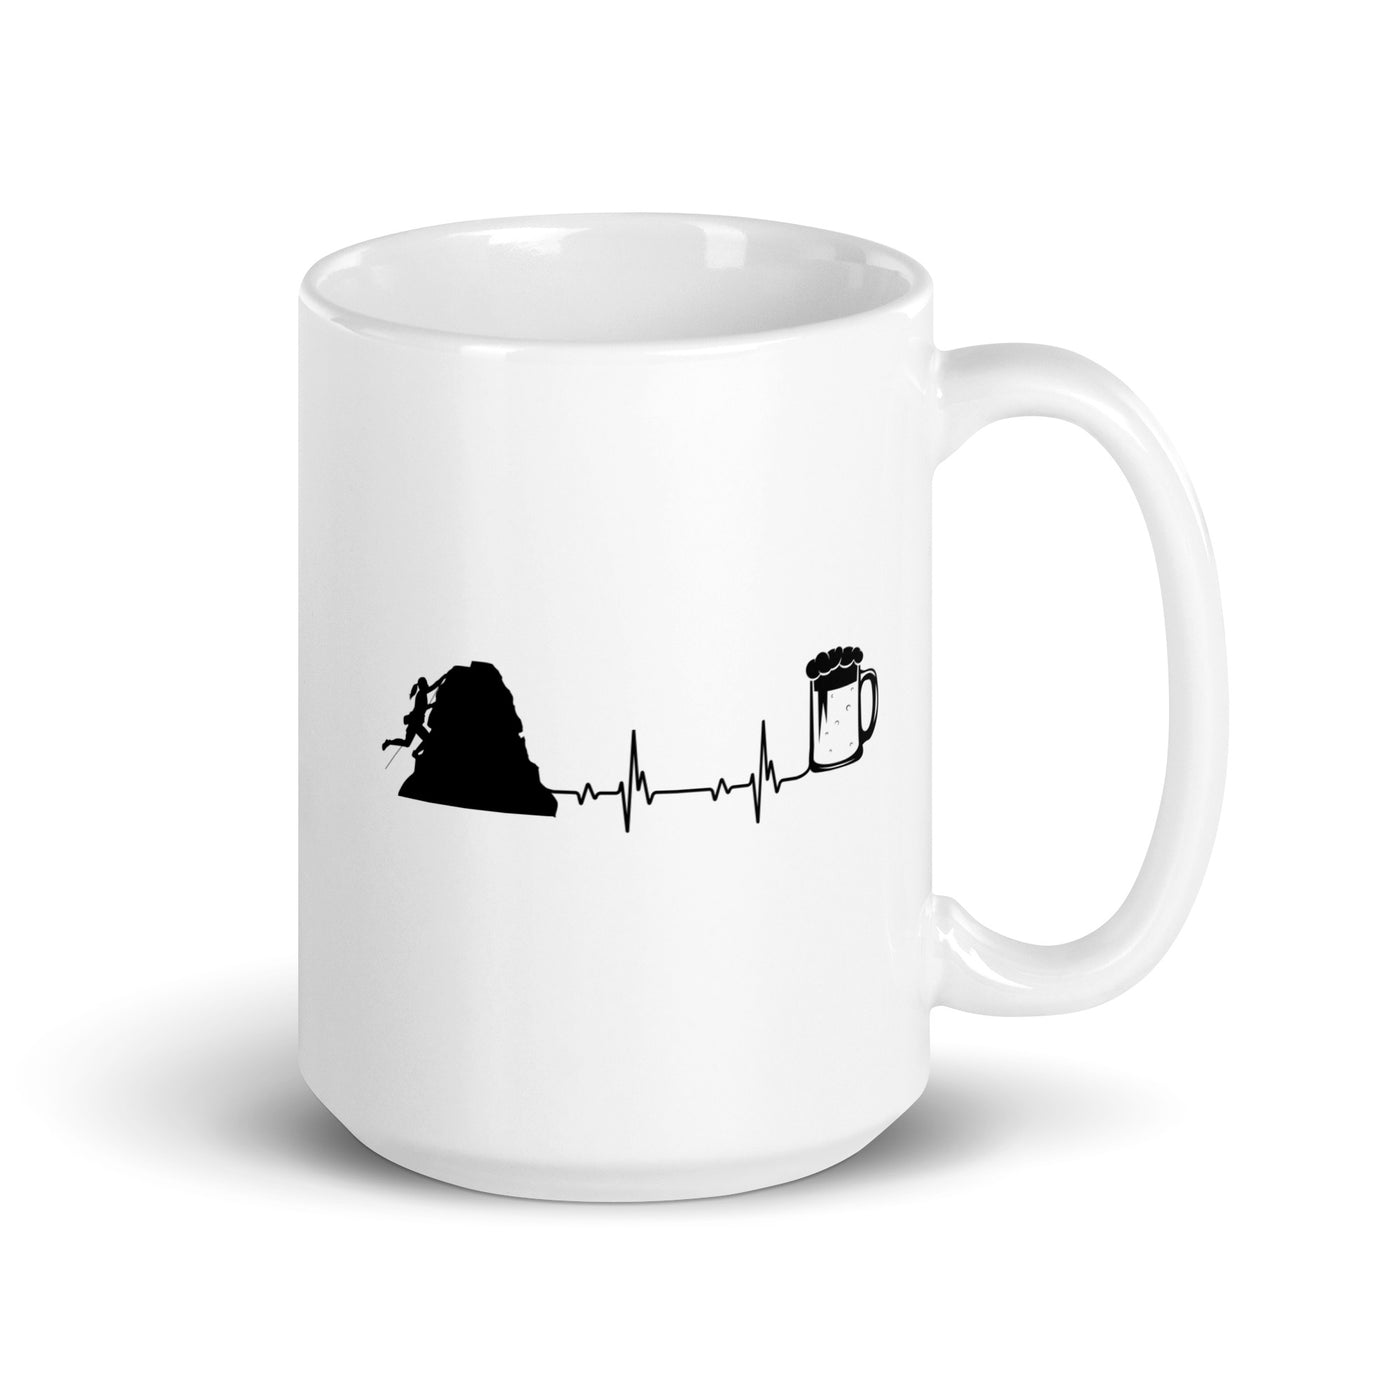 Heartbeat Beer And Climbing - Tasse klettern 15oz